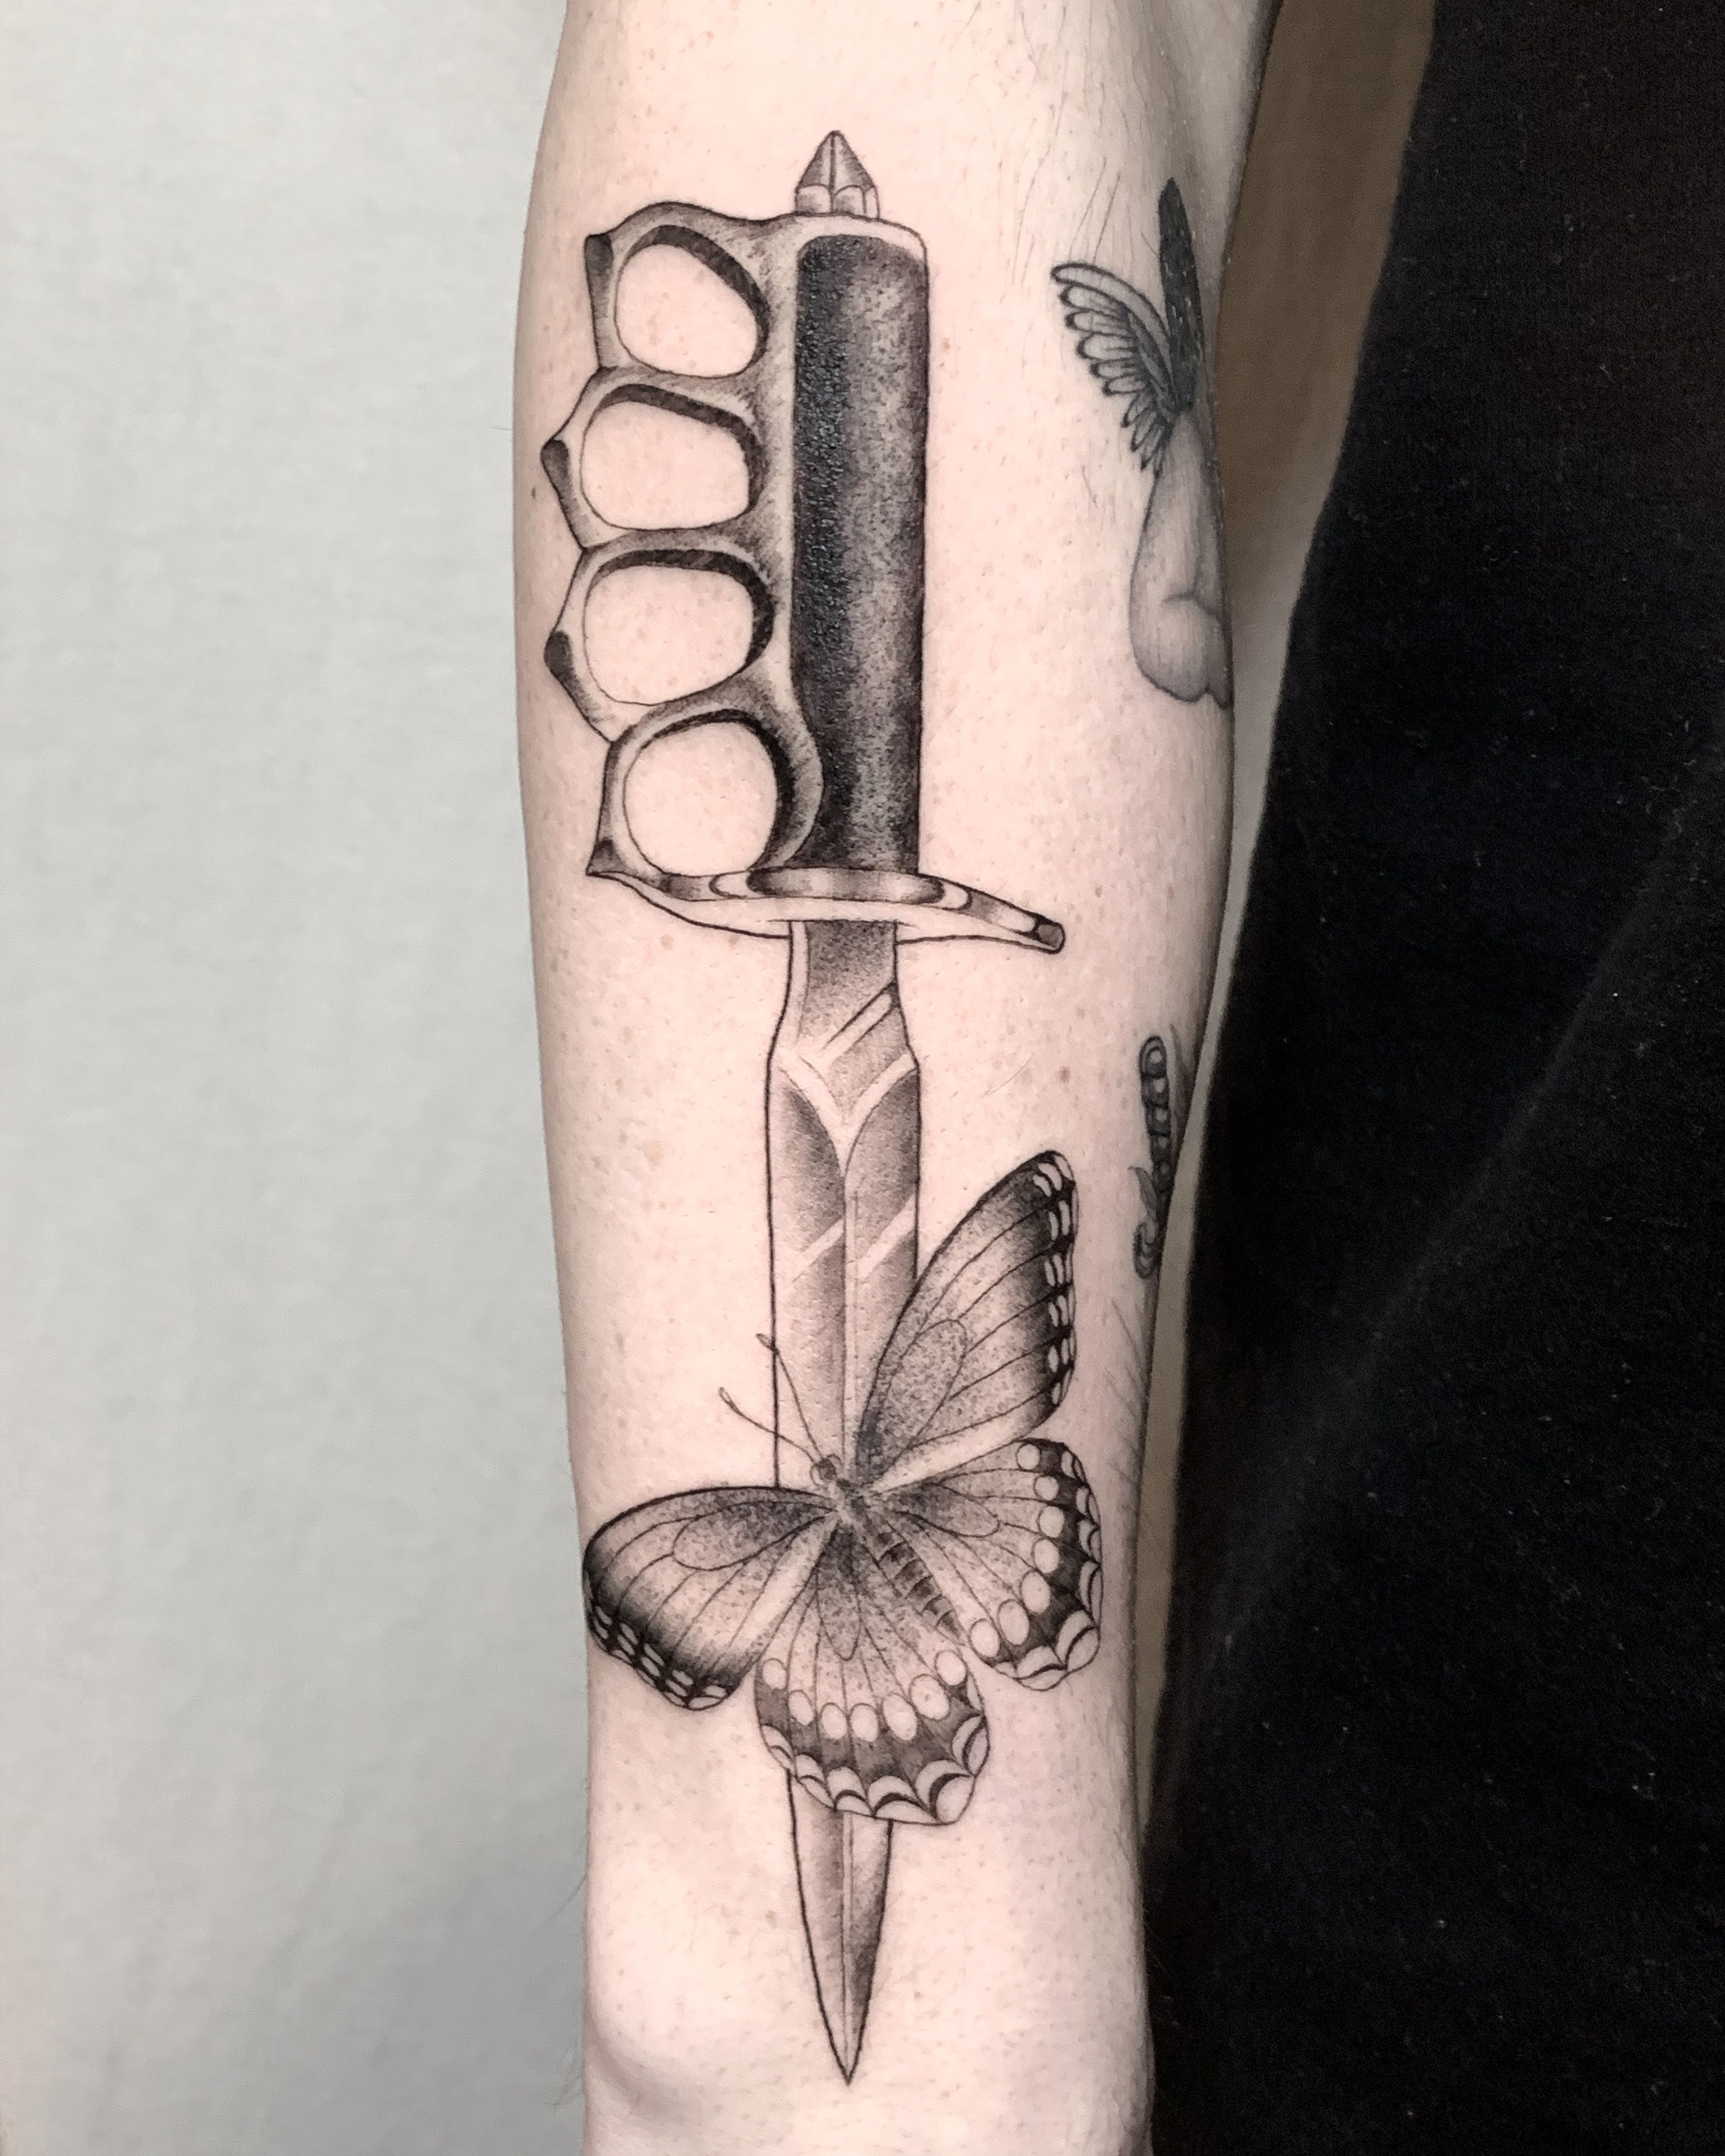 Top 9 Dagger Tattoo Designs And Pictures | Styles At Life